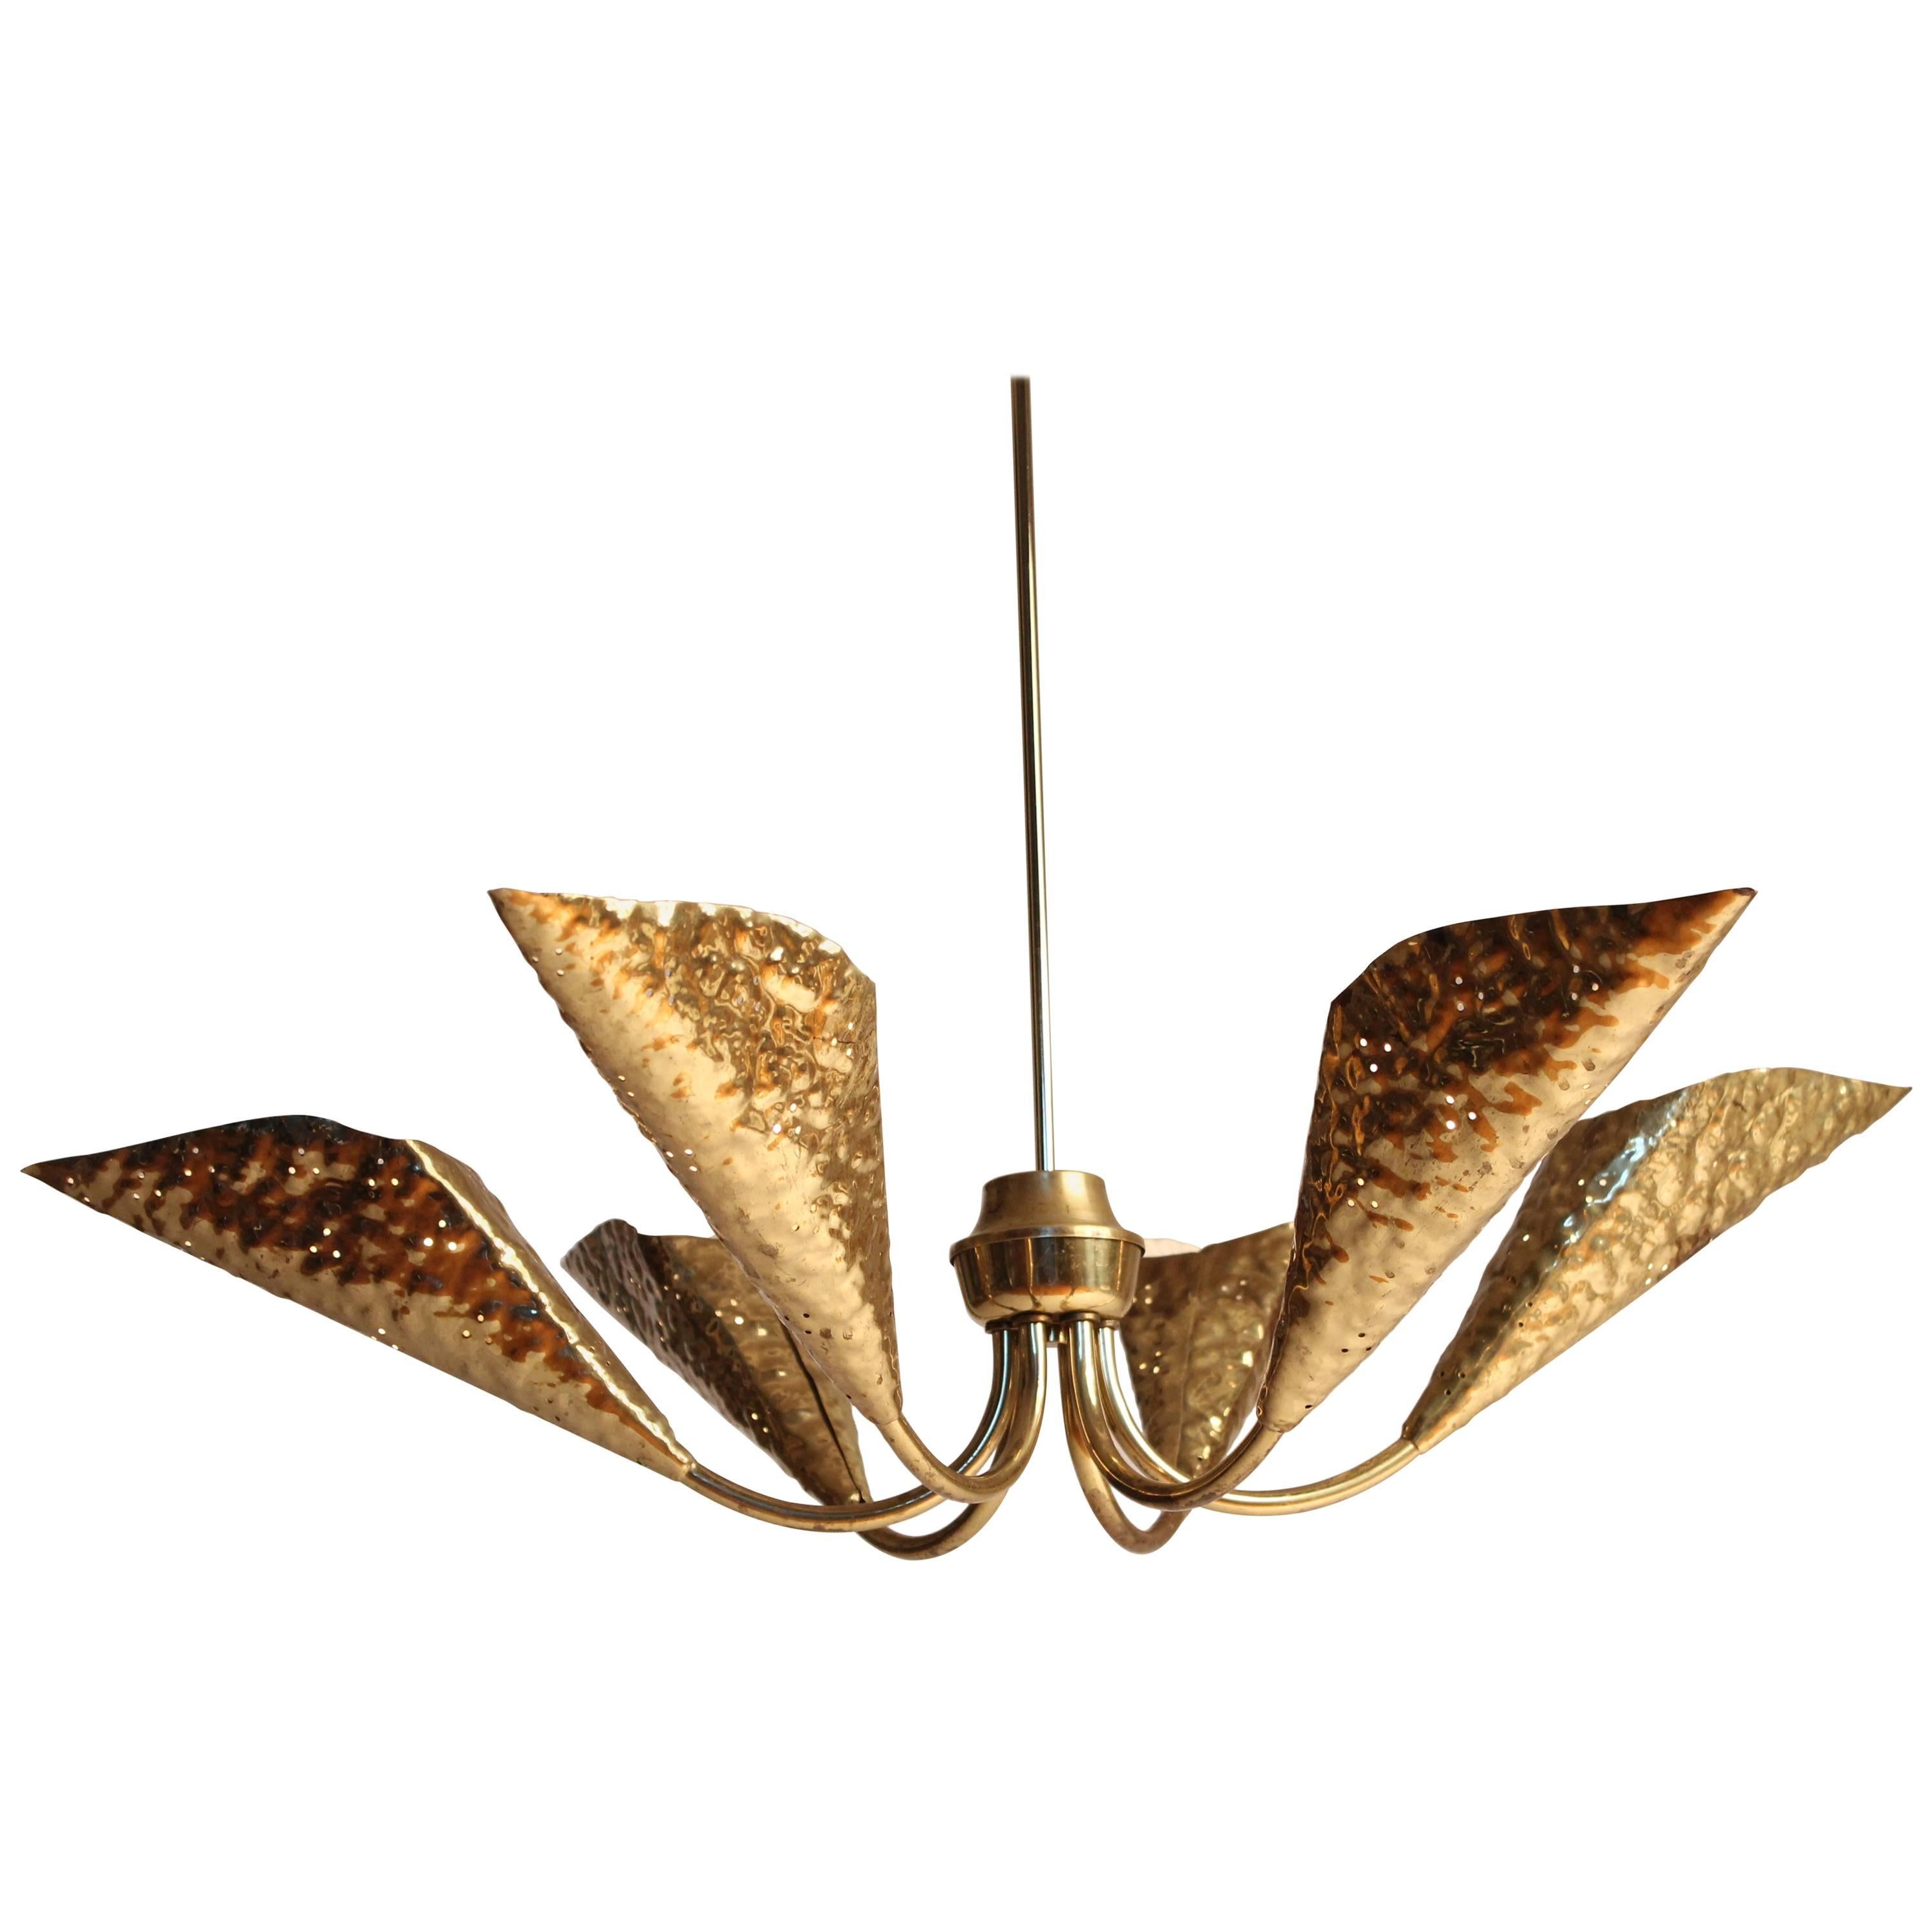 Hand-Hammered Six-Arm Brass Chandelier in the style of Arredoluce , 1950s, Italy